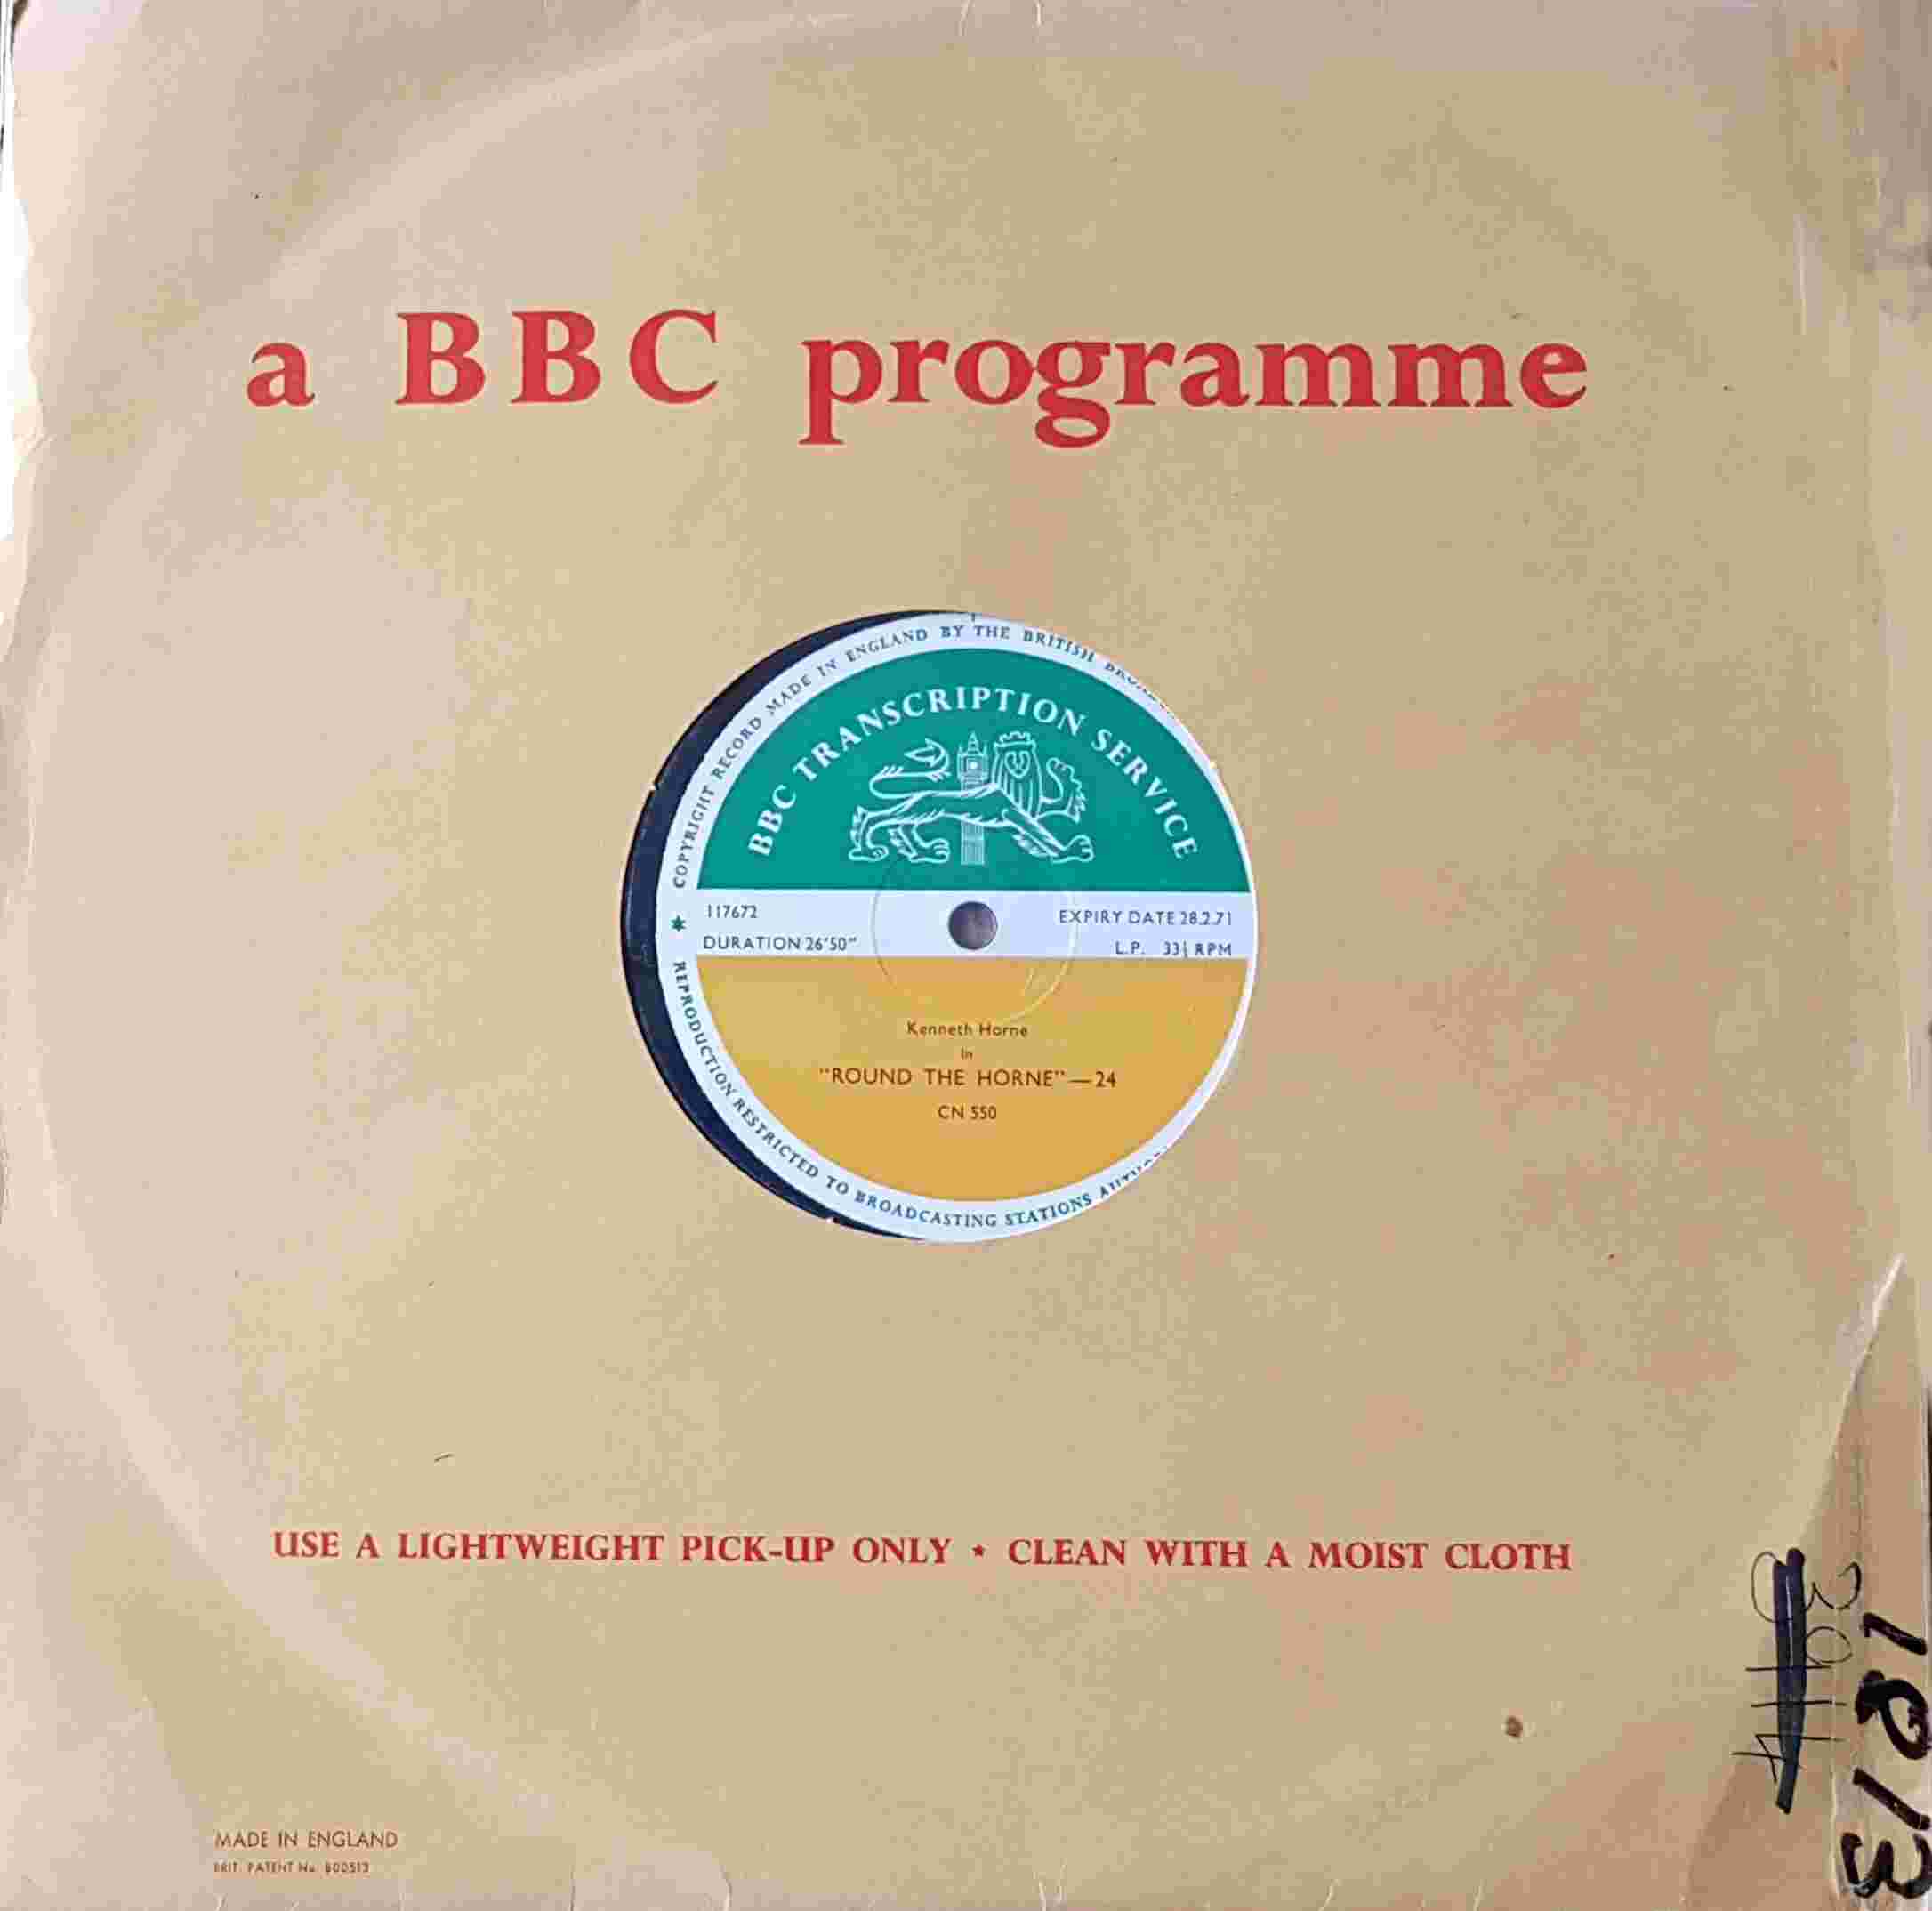 Picture of CN 550 13 Round the Horne - 24 & 25 by artist Kenneth Horne from the BBC records and Tapes library